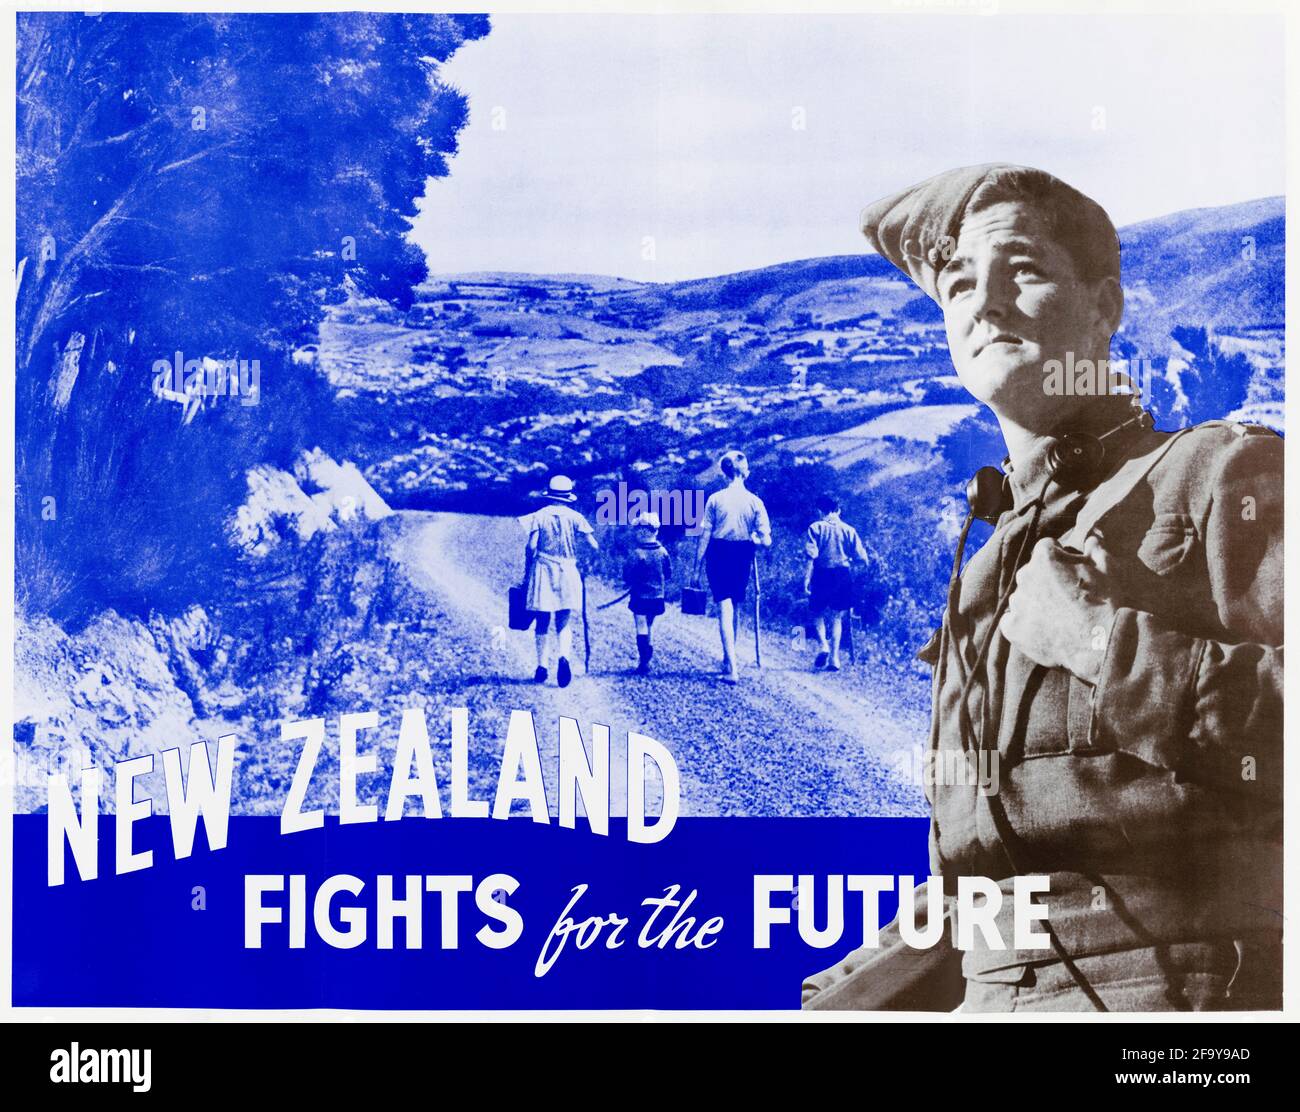 New Zealand, WW2 motivational poster, New Zealand Fights for the Future, 1942-1945 Stock Photo